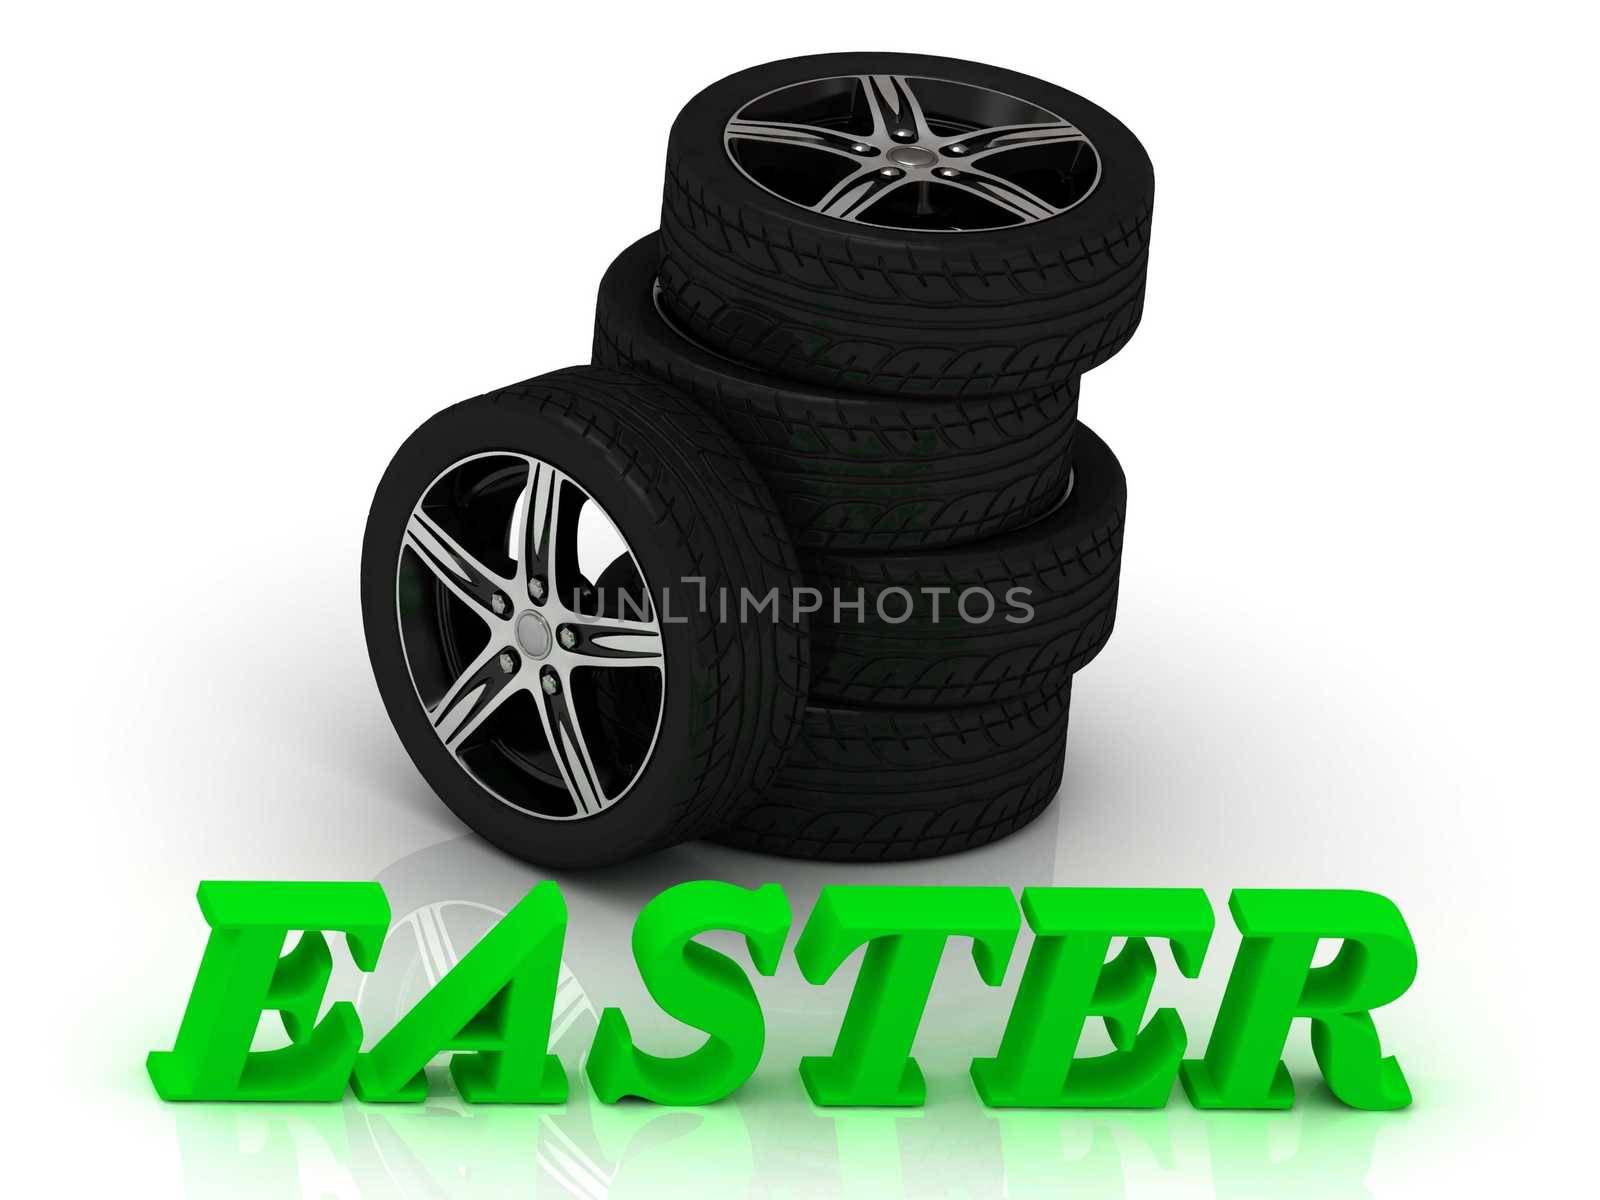 EASTER- bright letters and rims mashine black wheels by GreenMost